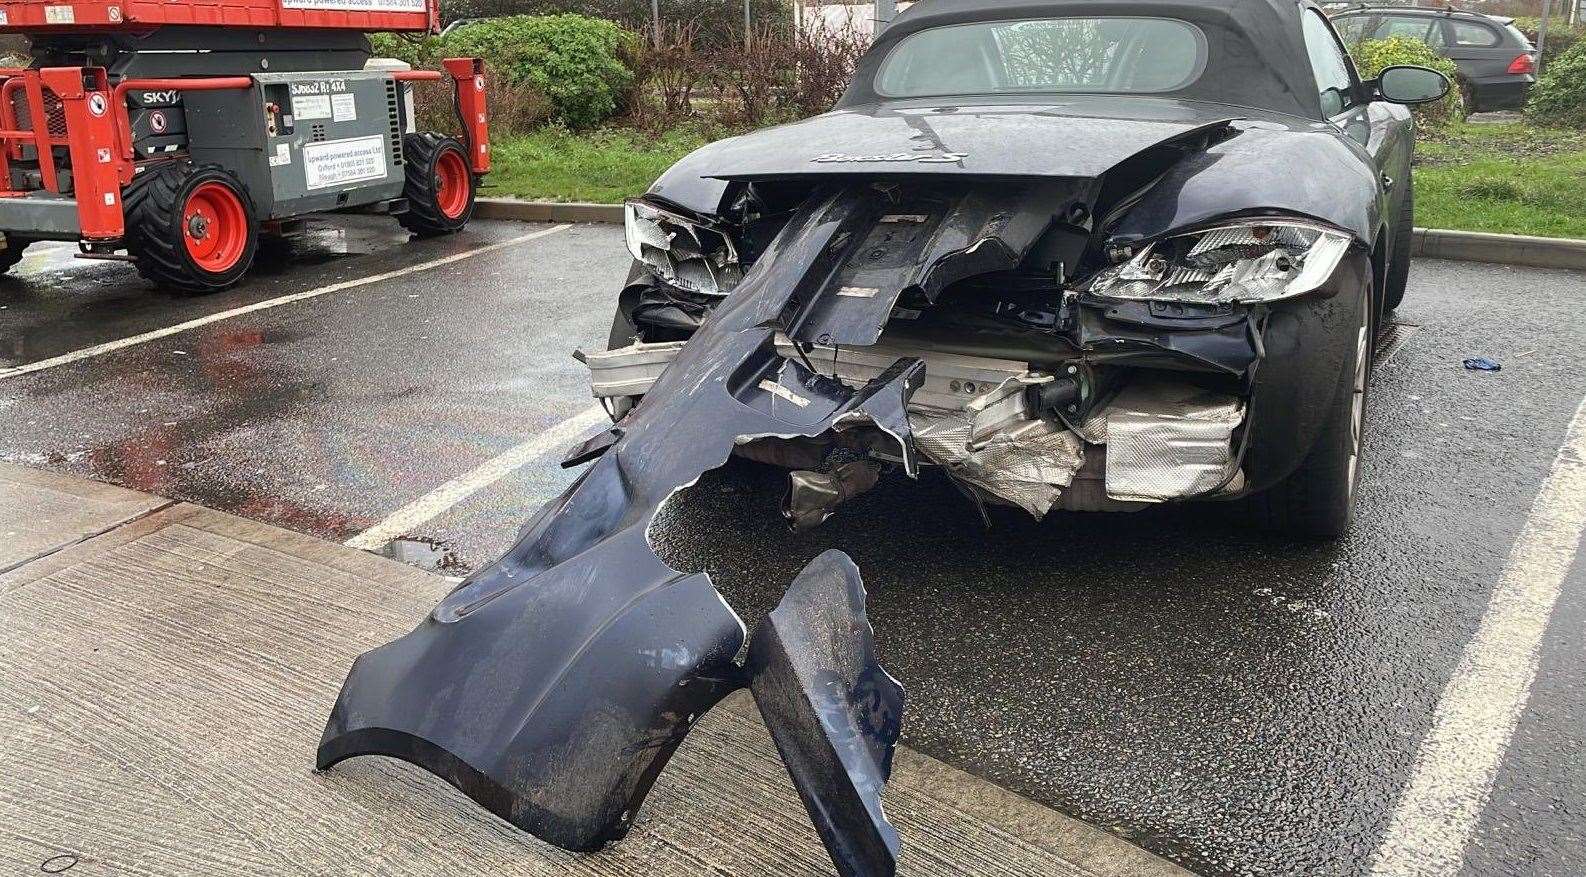 The Porsche was very badly damaged. Picture: Surrey Police